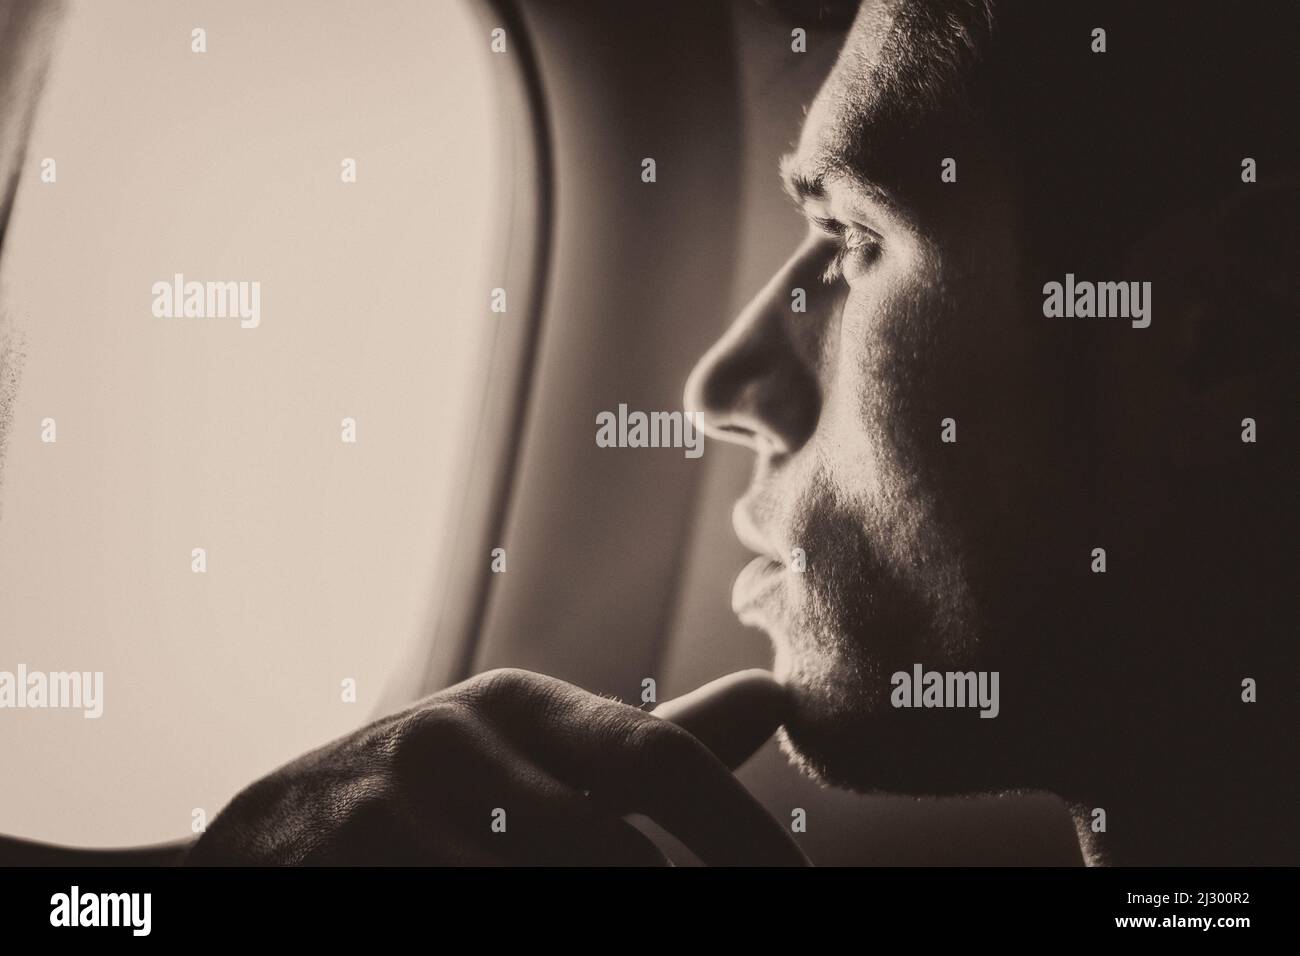 Young handsome man against plane window sitting Stock Photo